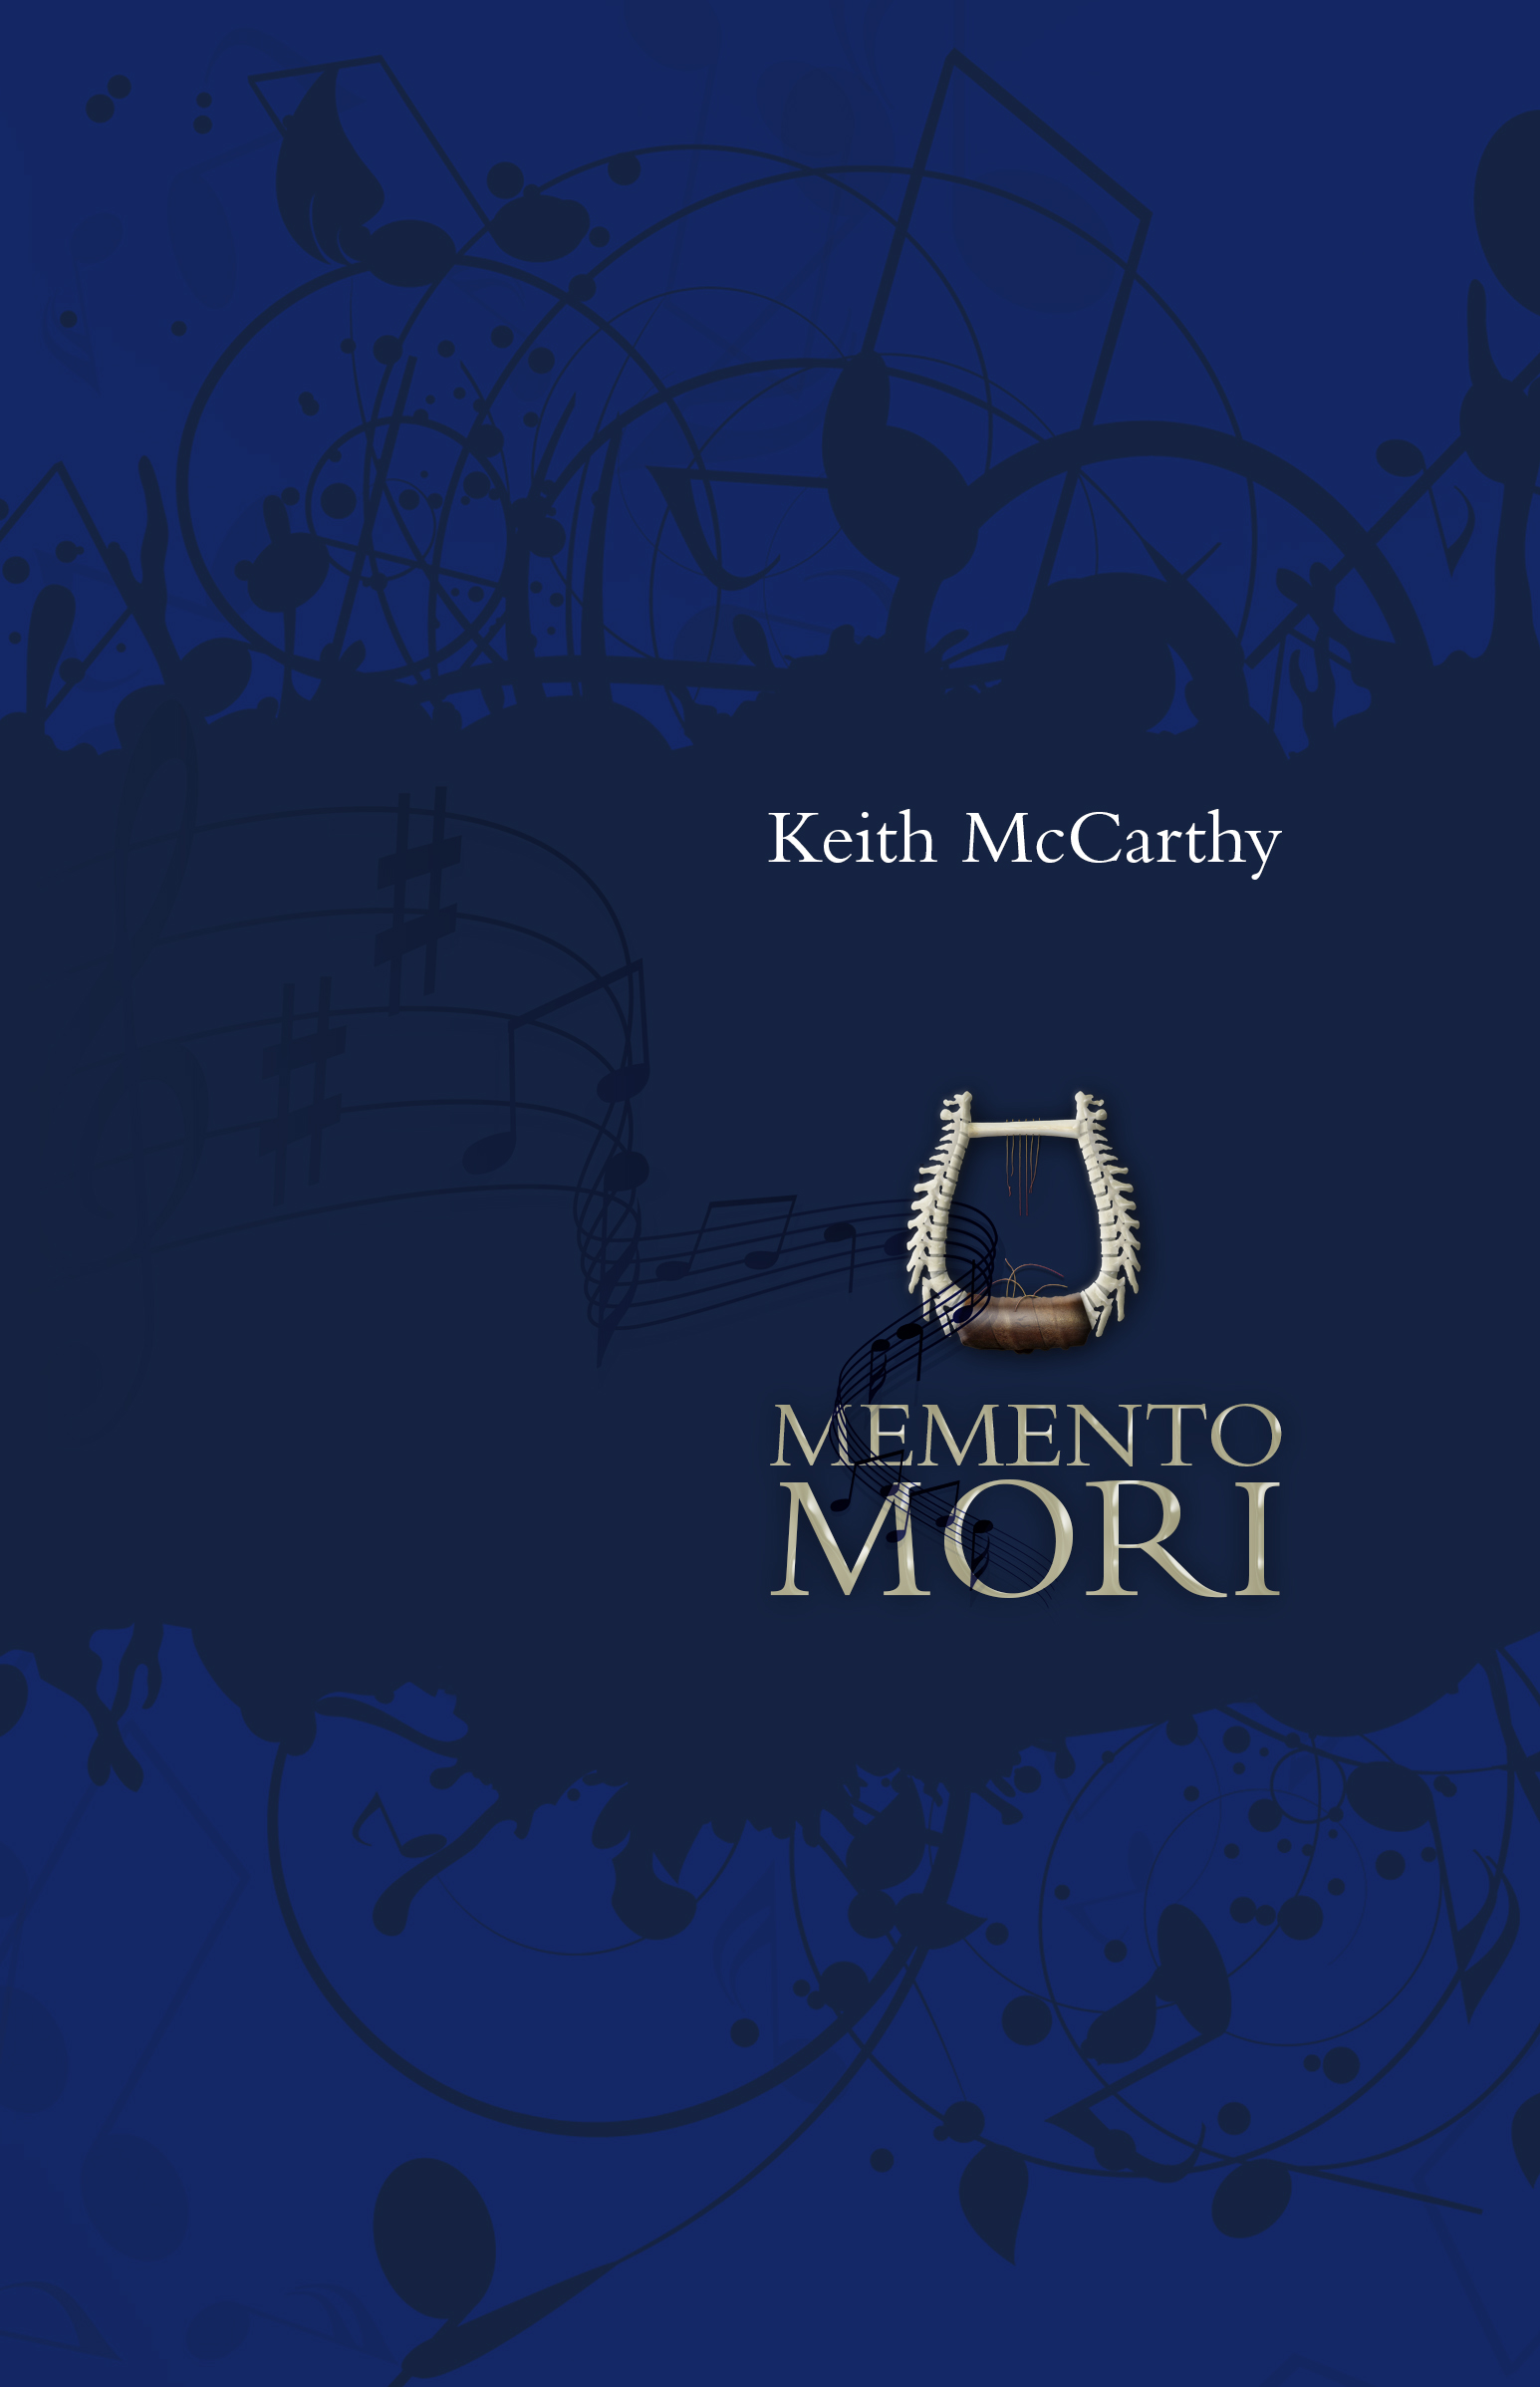 Memento Mori, by Keith McCarthy, front cover image.